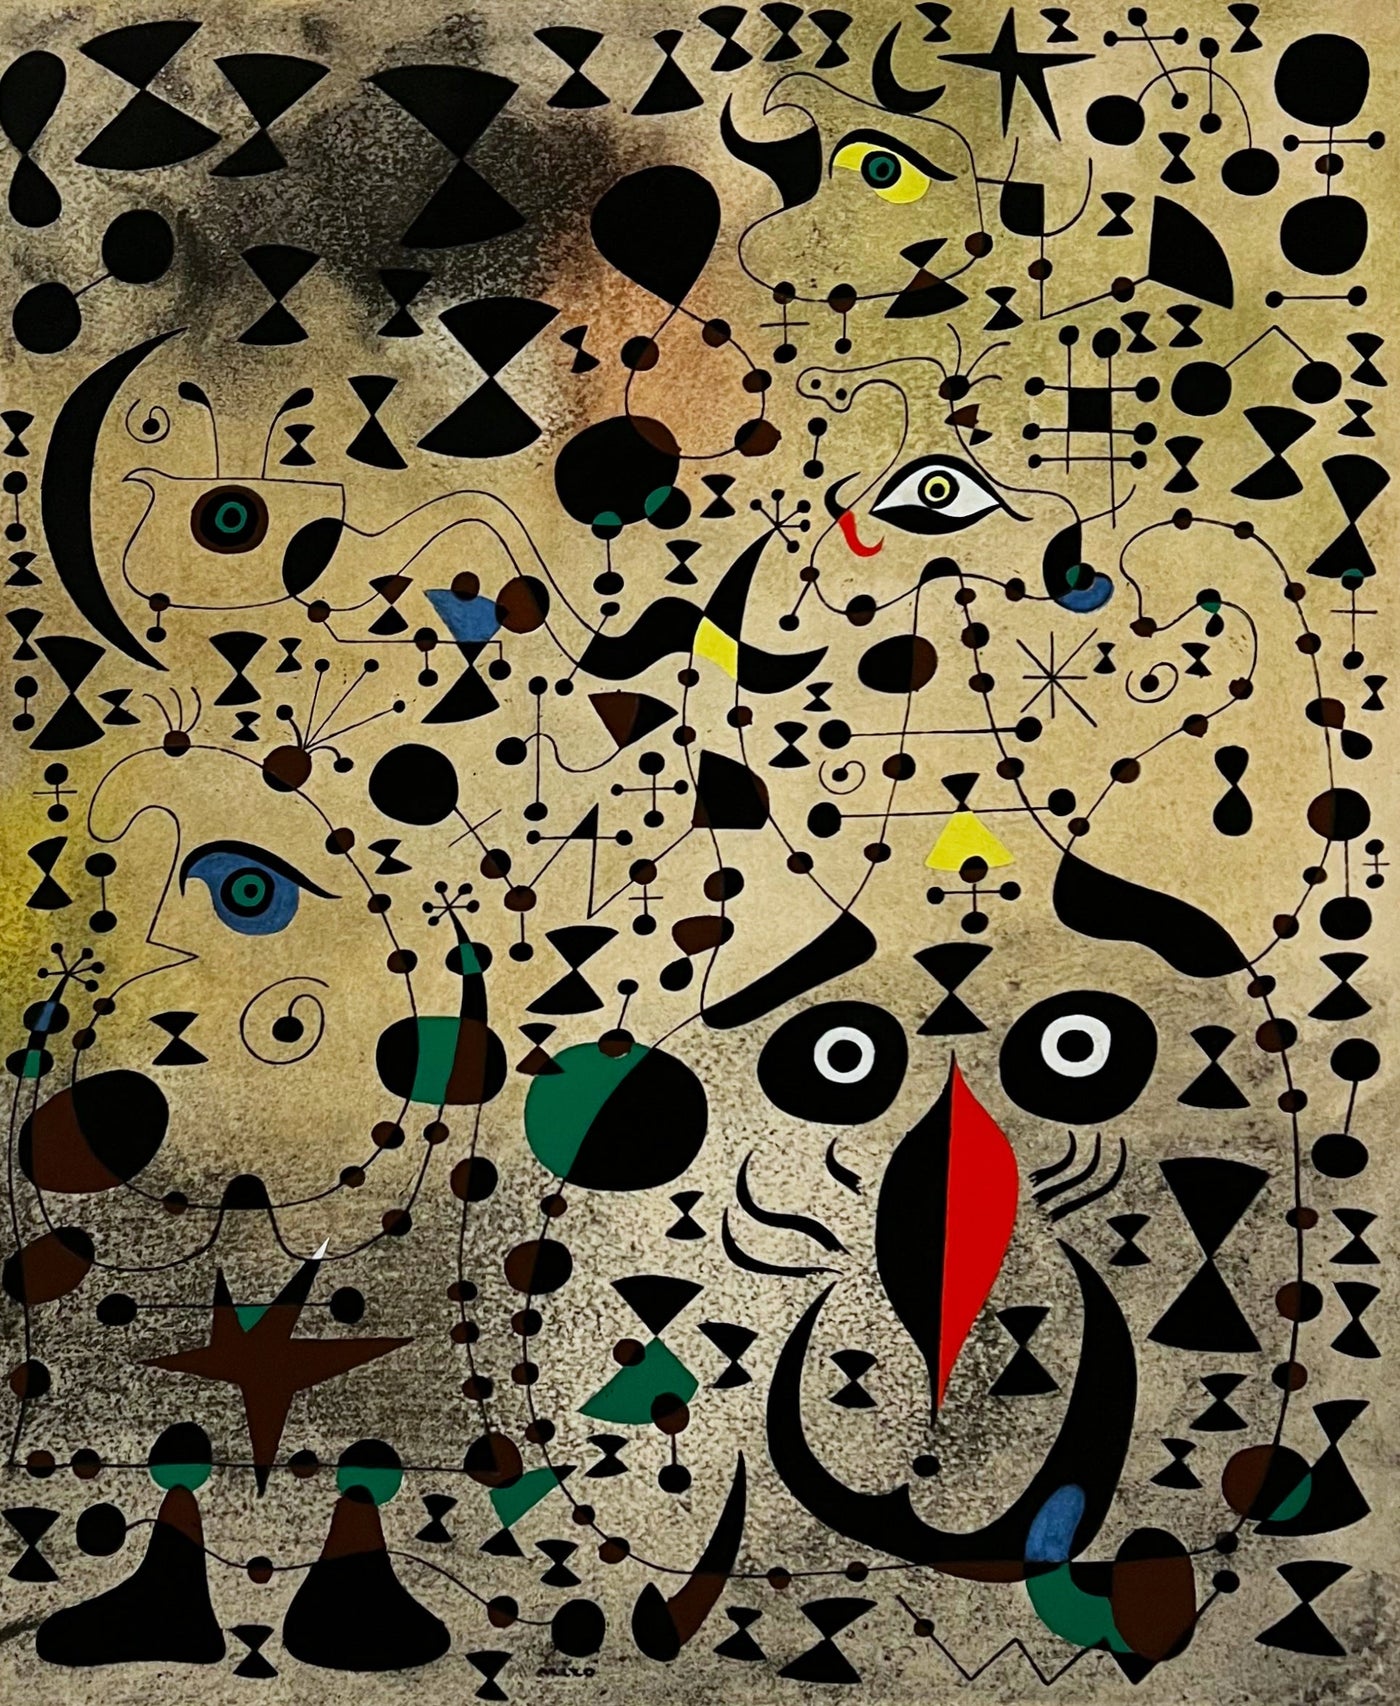 Joan Miro (after) Le bel oiseau dechiffrant l'inconnu au couple d'amoureux (The Beautiful Bird Revealing the Unknown to a Pair of Lovers), Plate XX (Cramer No. 58) 1959